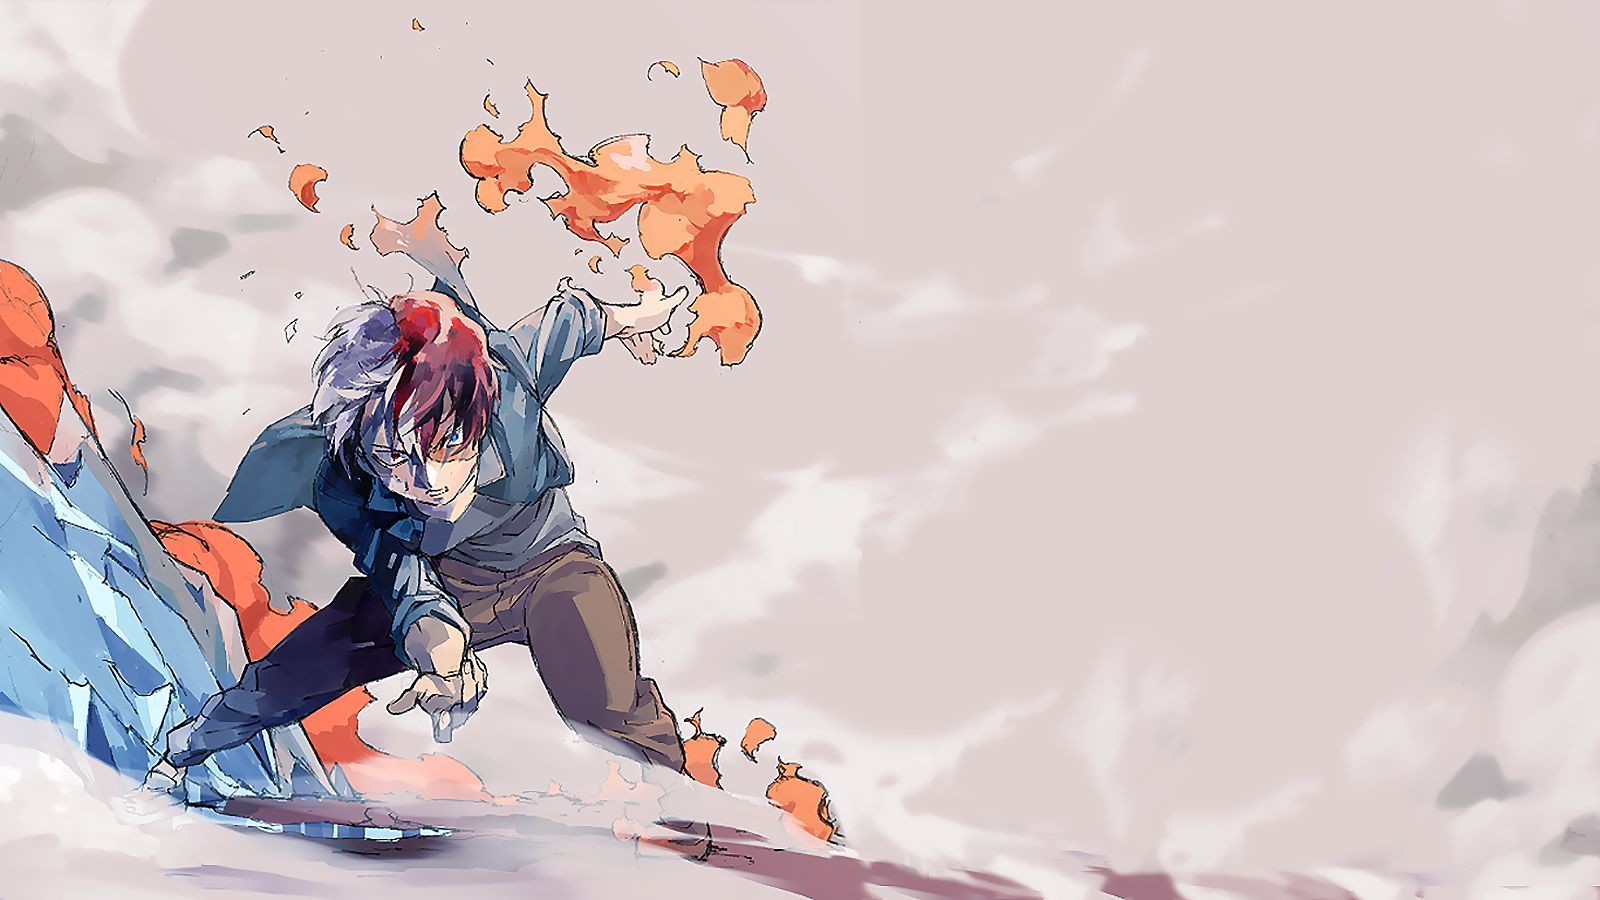 A red-haired man with a blue jacket and a white shirt is seen throwing fireballs at an opponent - My Hero Academia, Shoto Todoroki